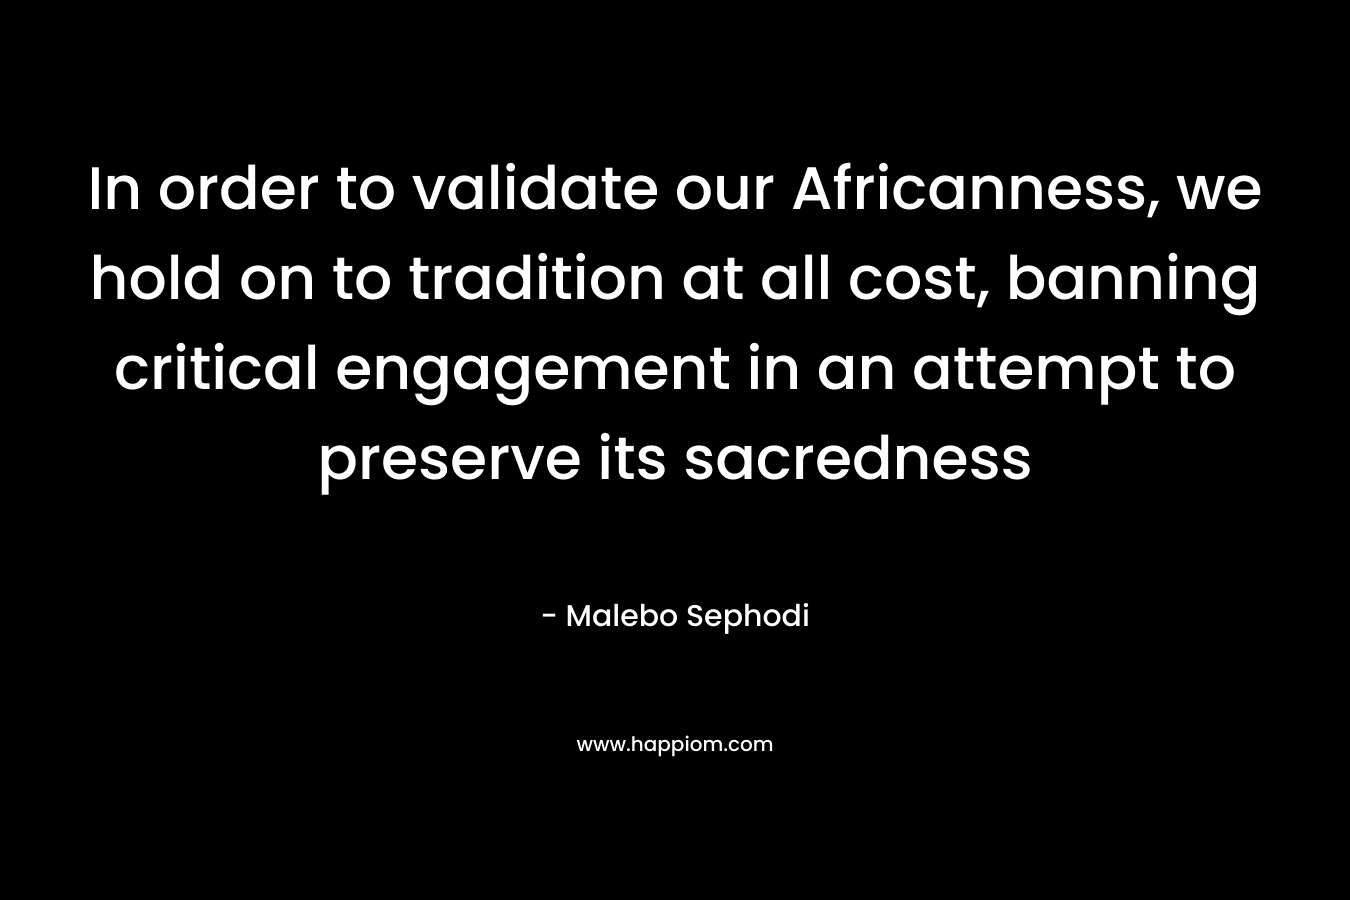 In order to validate our Africanness, we hold on to tradition at all cost, banning critical engagement in an attempt to preserve its sacredness